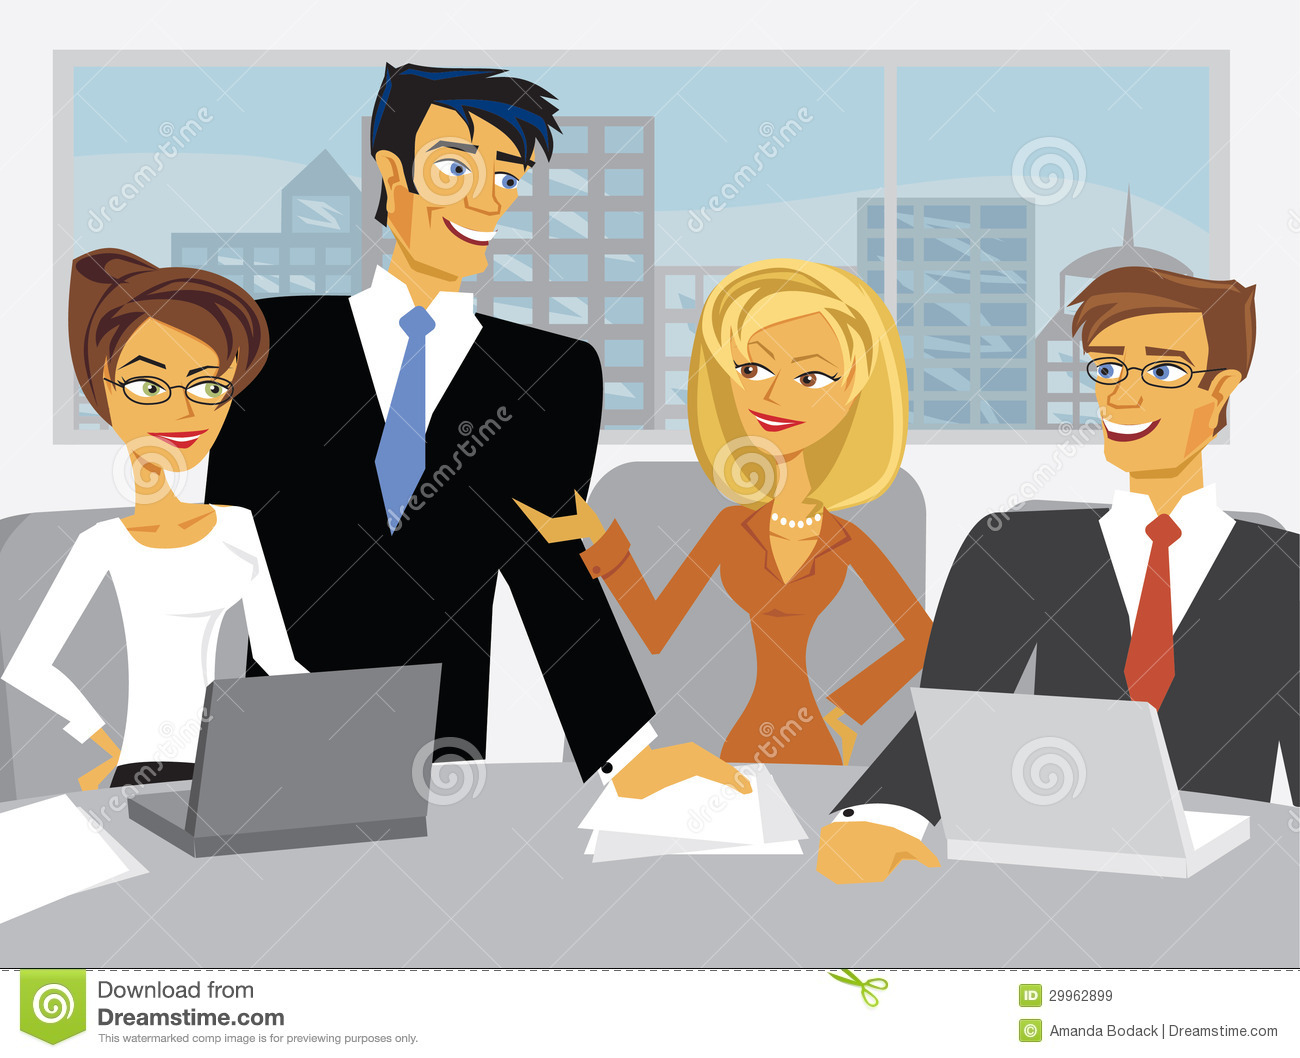 Royalty Free Stock Images  Vector Meeting Scene With Cartoon Business